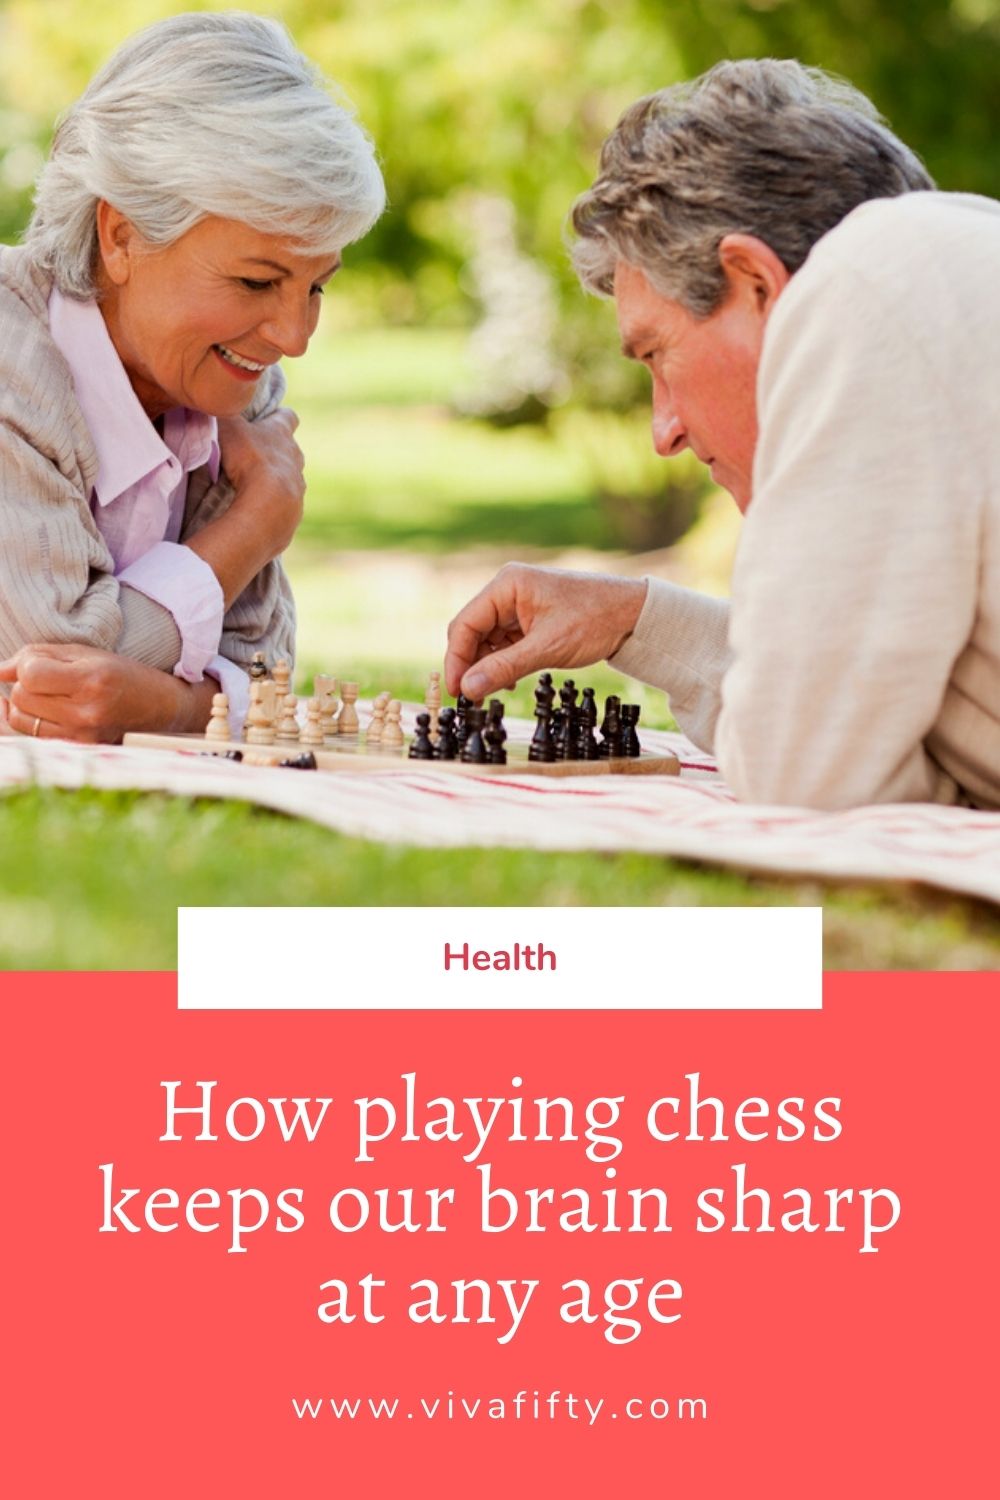 Playing chess can help keep your brain sharp at any age, especially in this era of electronics and social media.